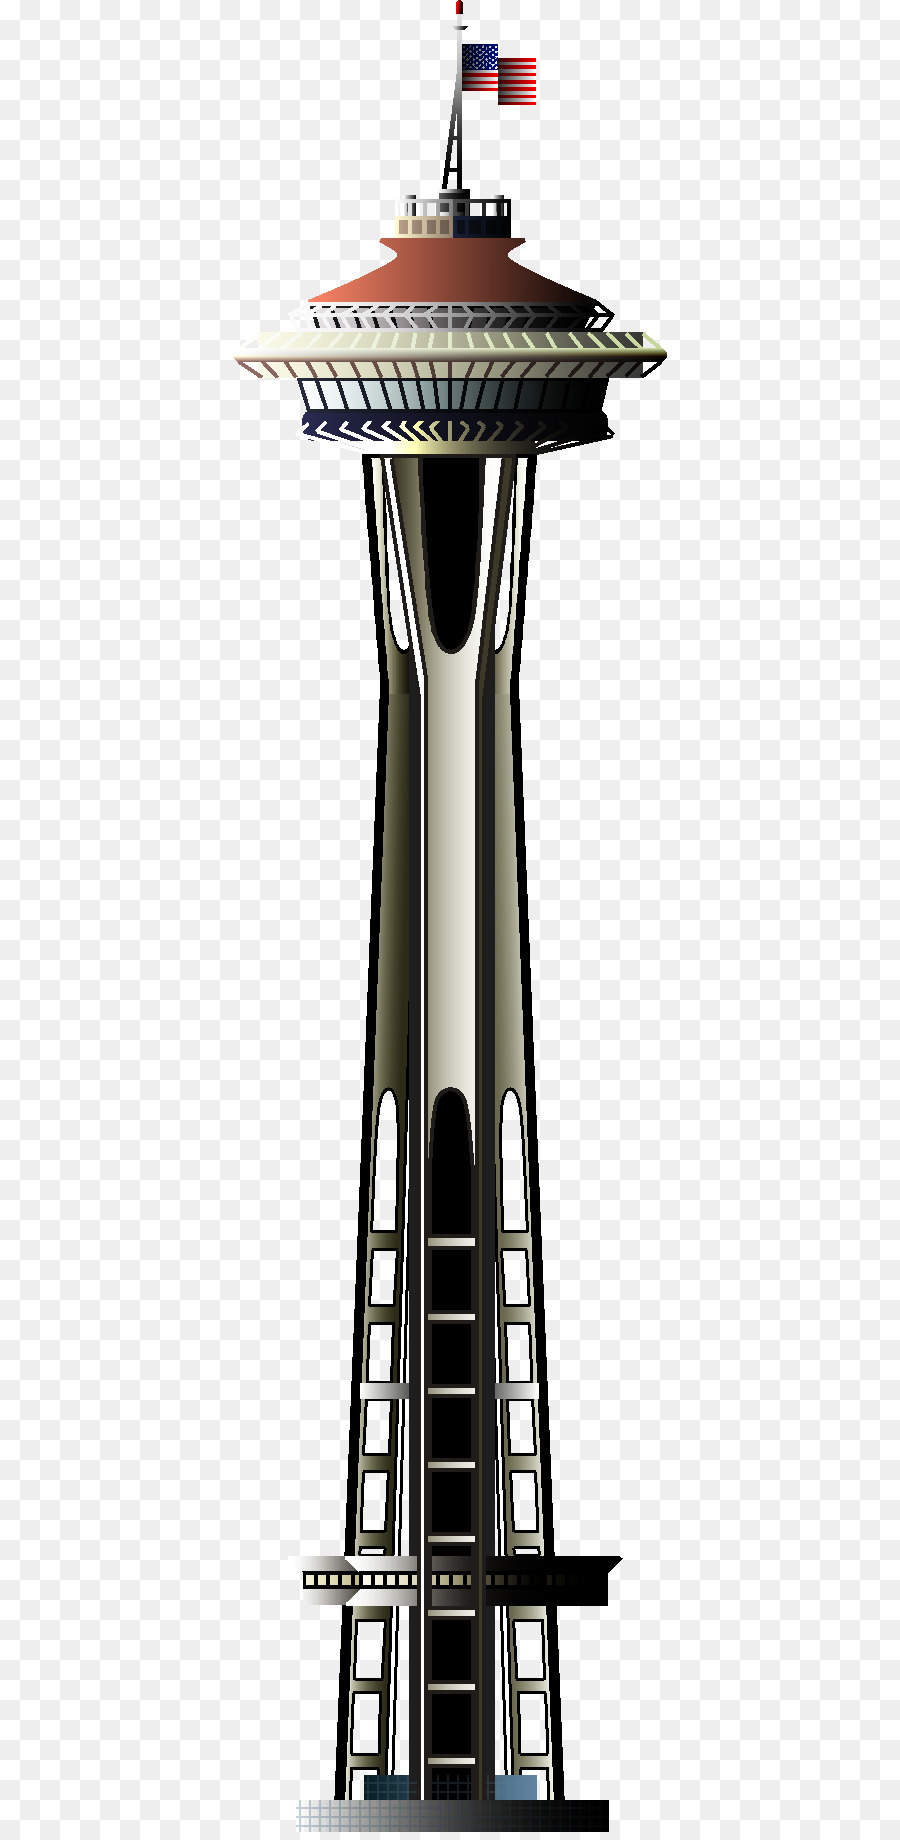 Drawing Clip art - Space Needle png download - 434*1832 - Free Transparent Drawing png Download.